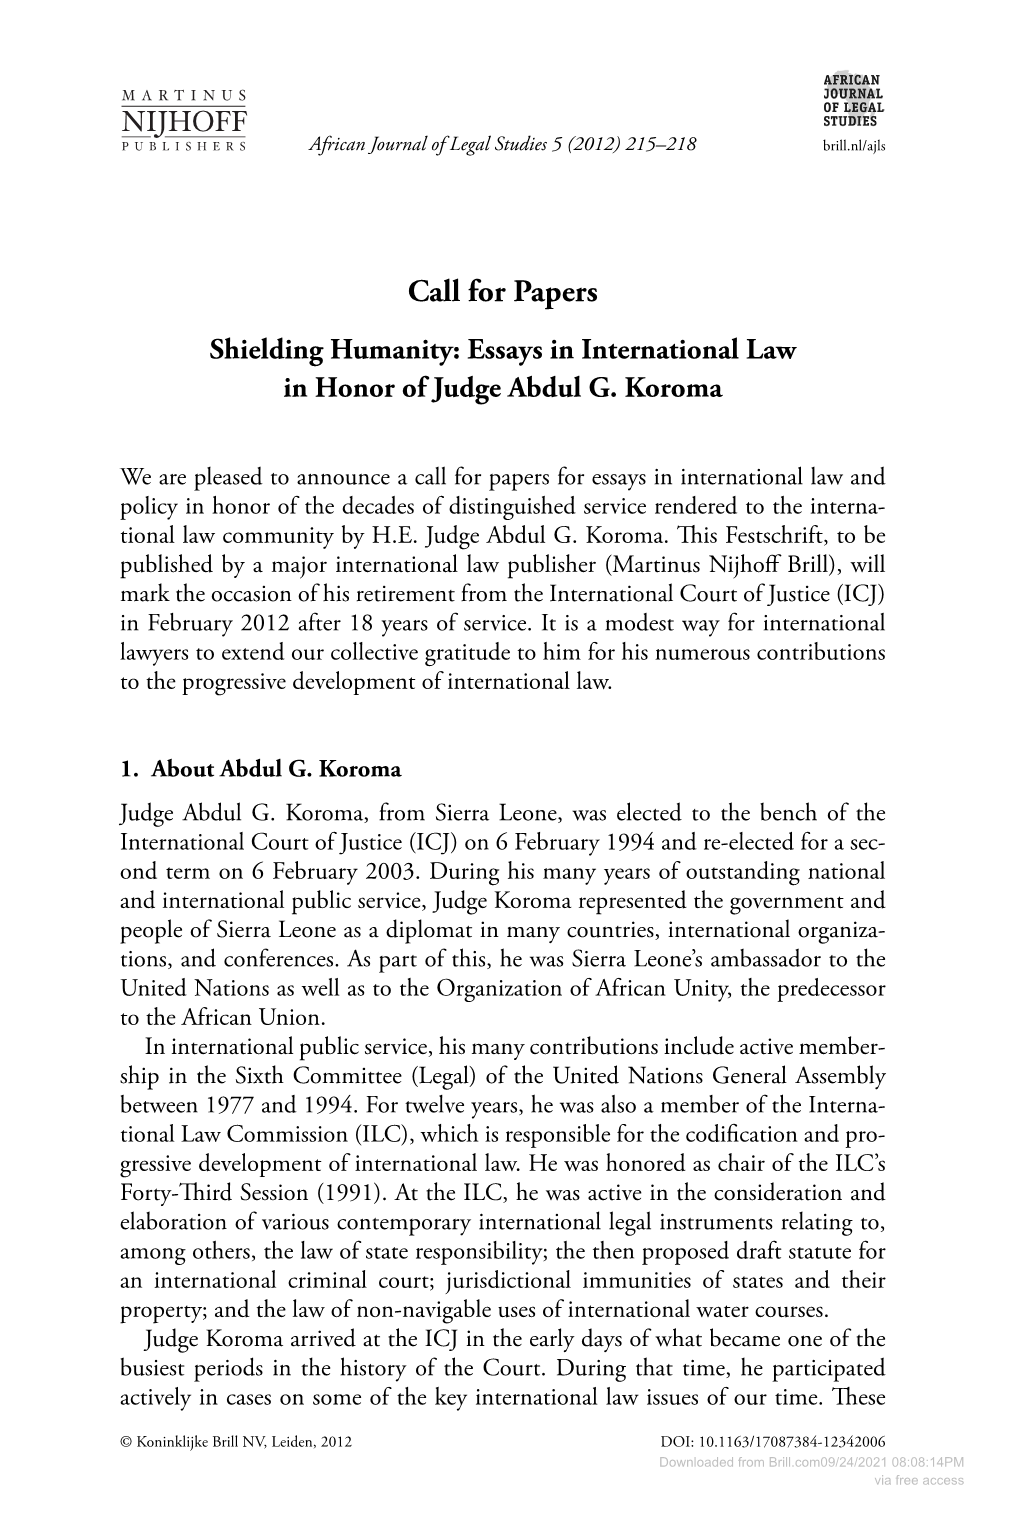 Call for Papers Shielding Humanity: Essays in International Law in Honor of Judge Abdul G